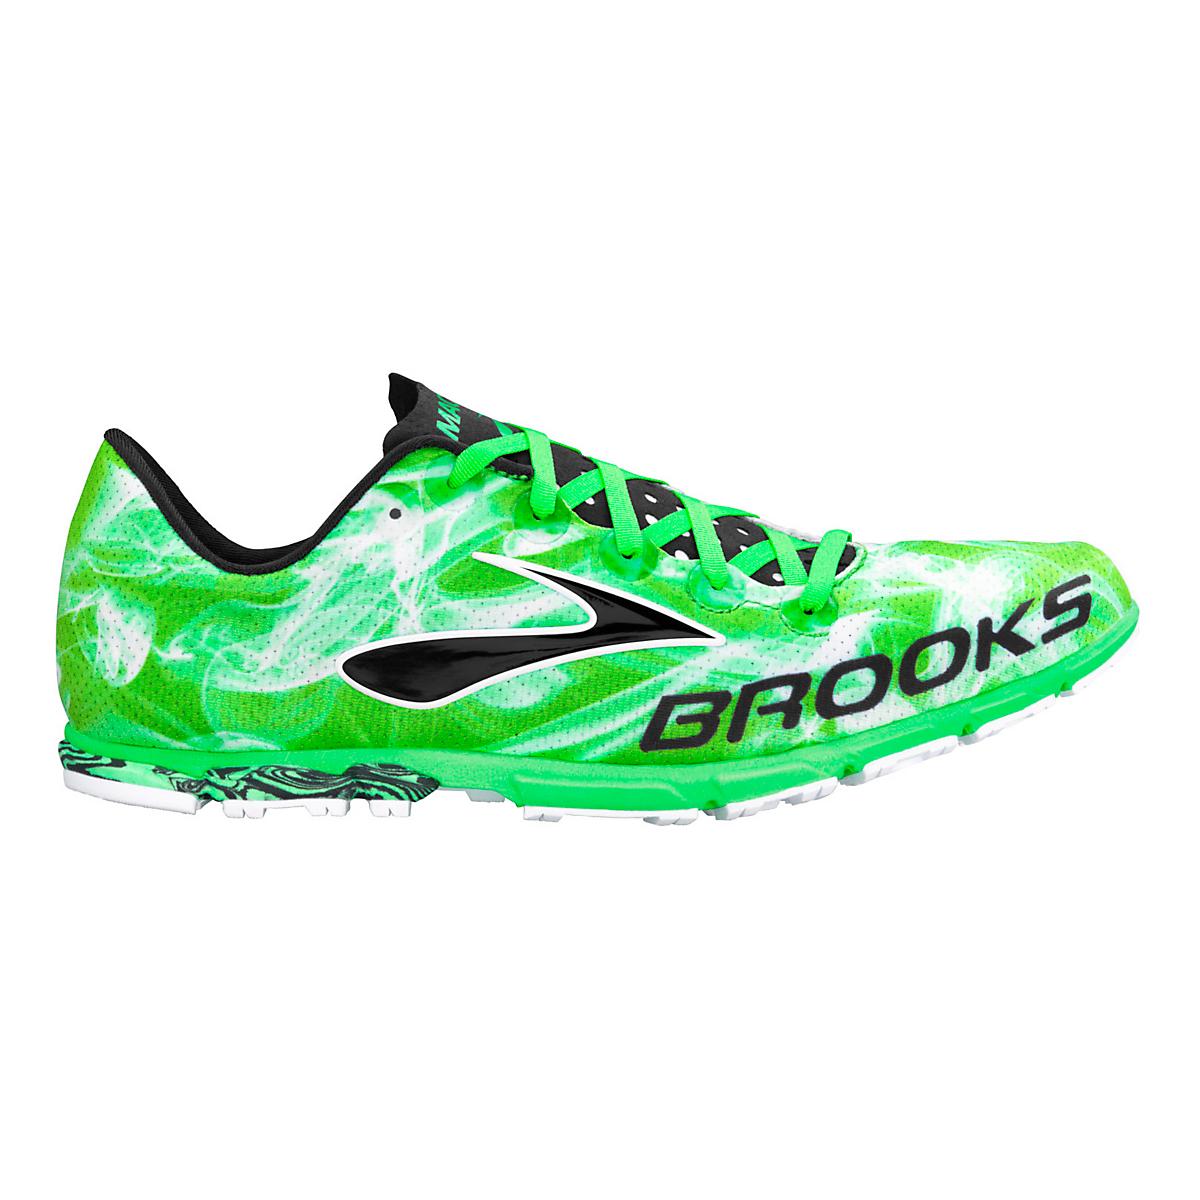 Mens Brooks Mach 15 Spikeless Track and Field Shoe at Road